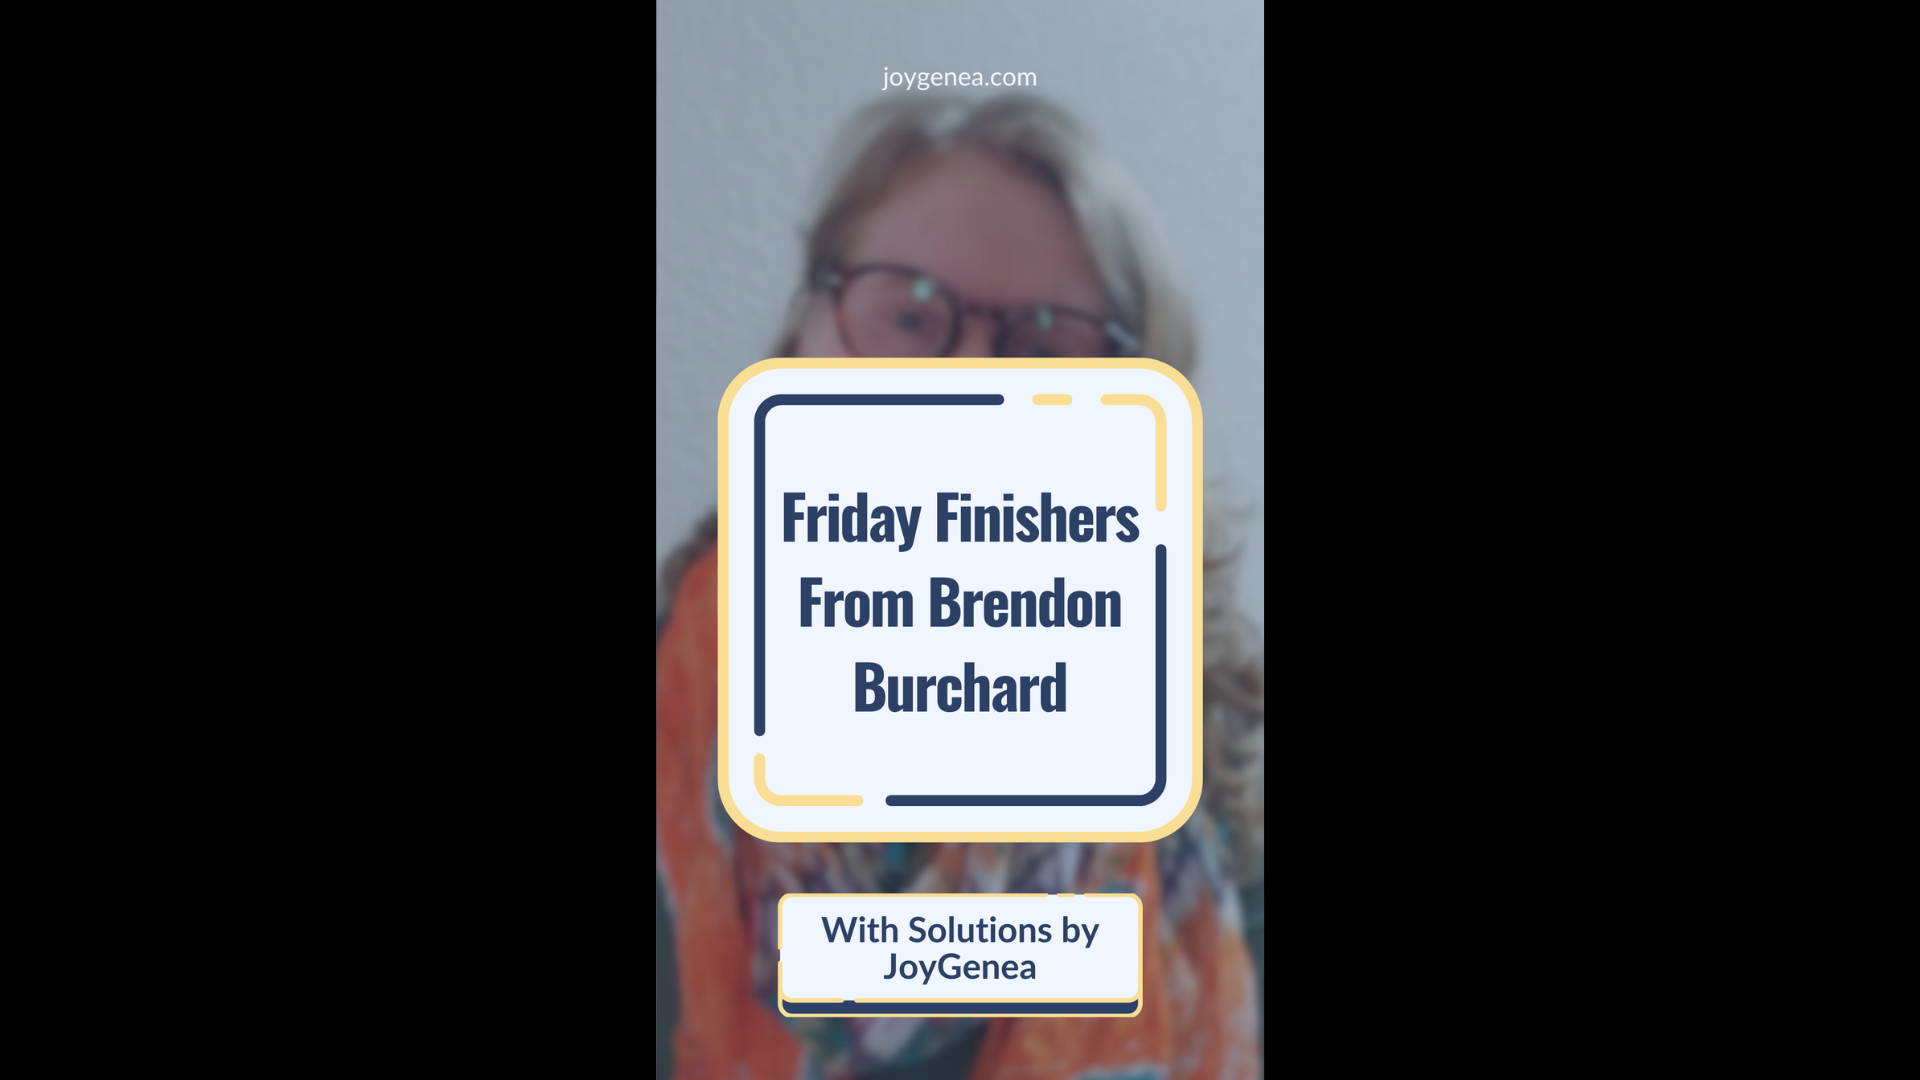 Featured image for “Friday finishers from Brendon Burchard”